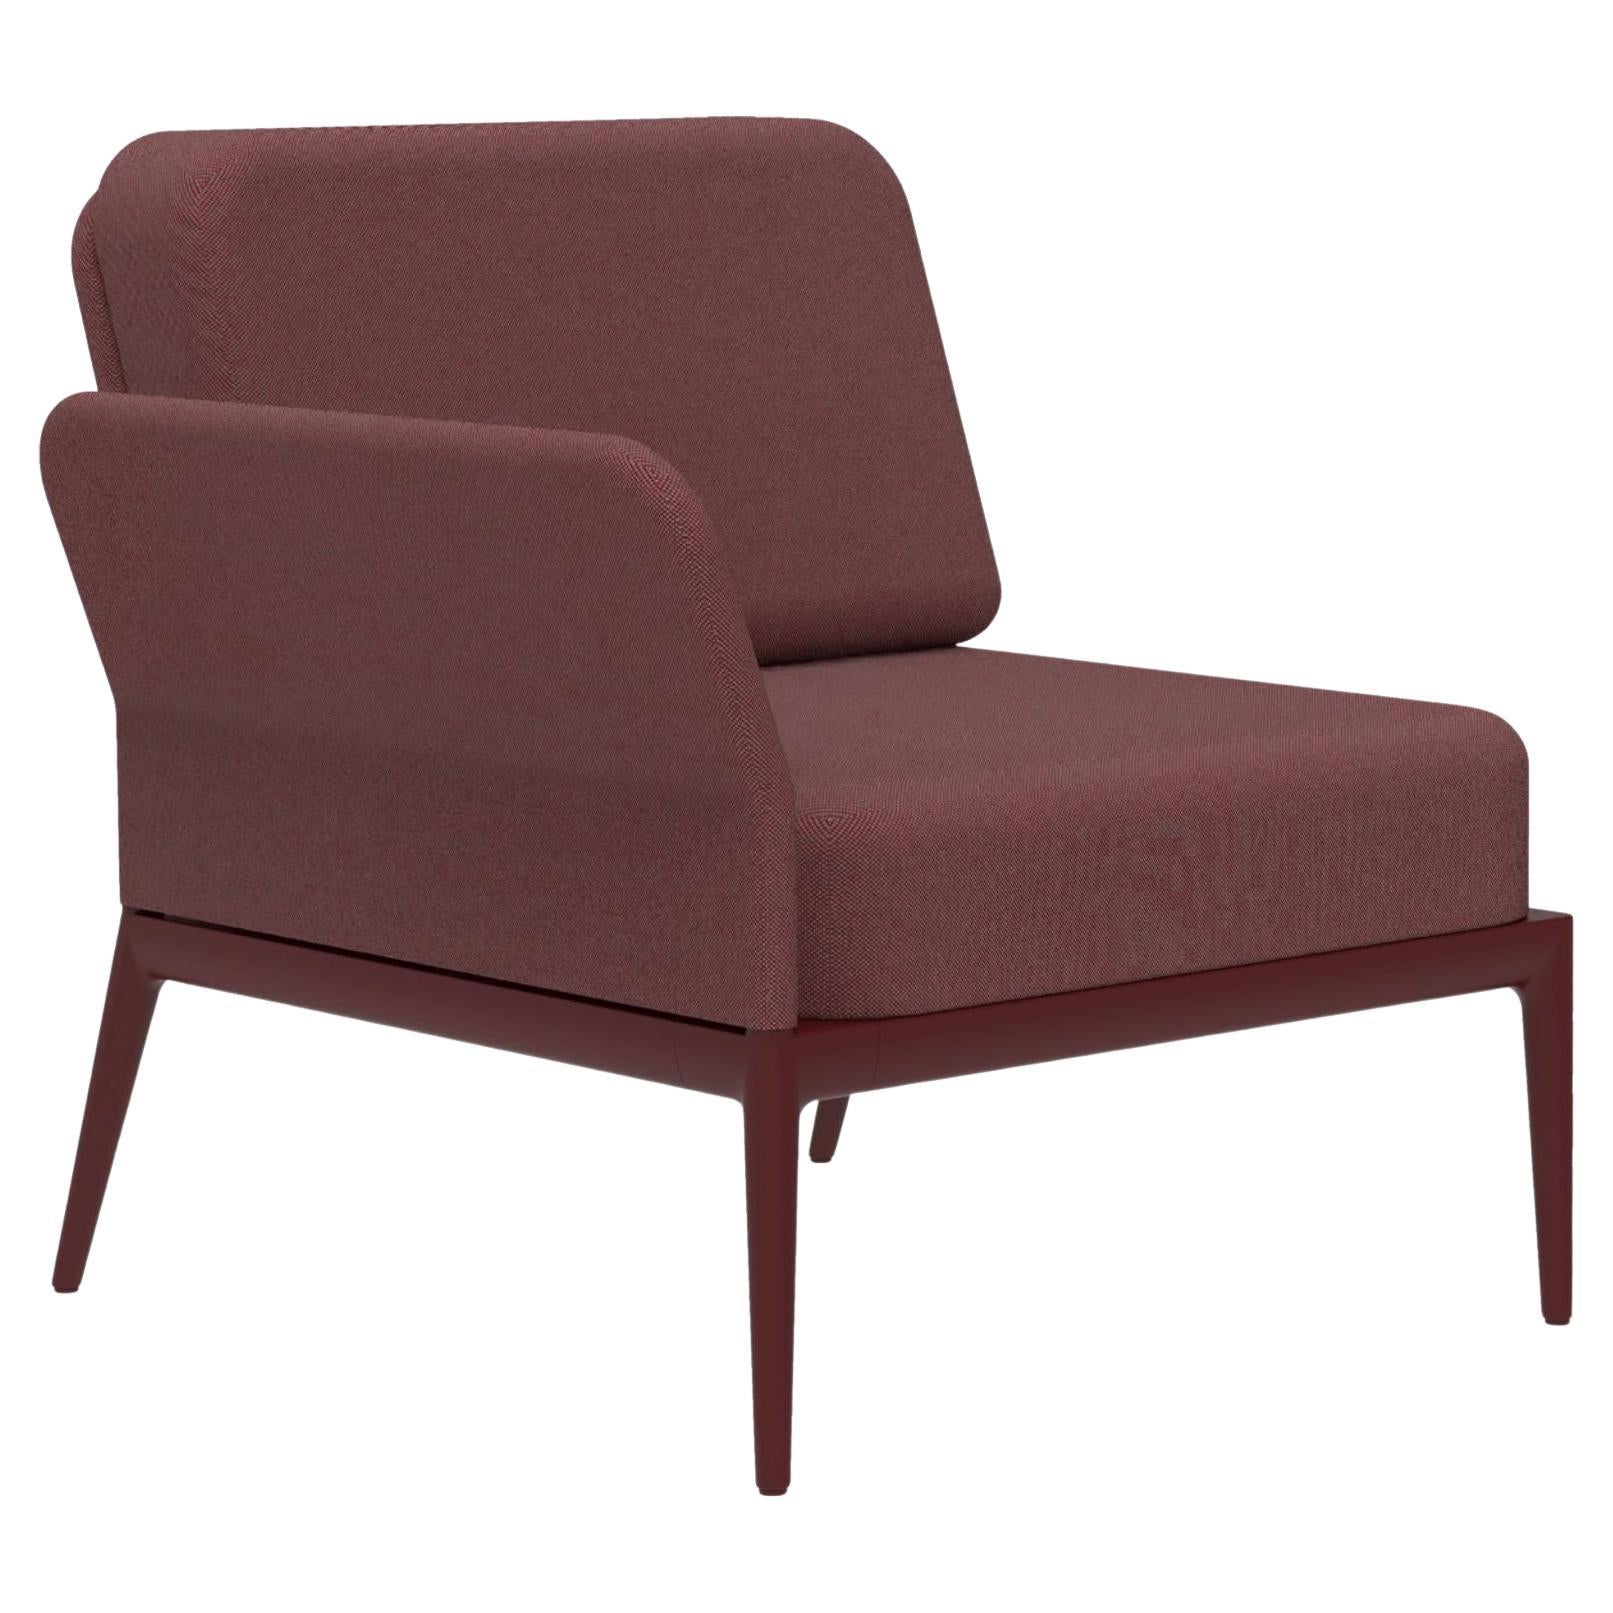 Cover Burgundy Right Modular Sofa by MOWEE